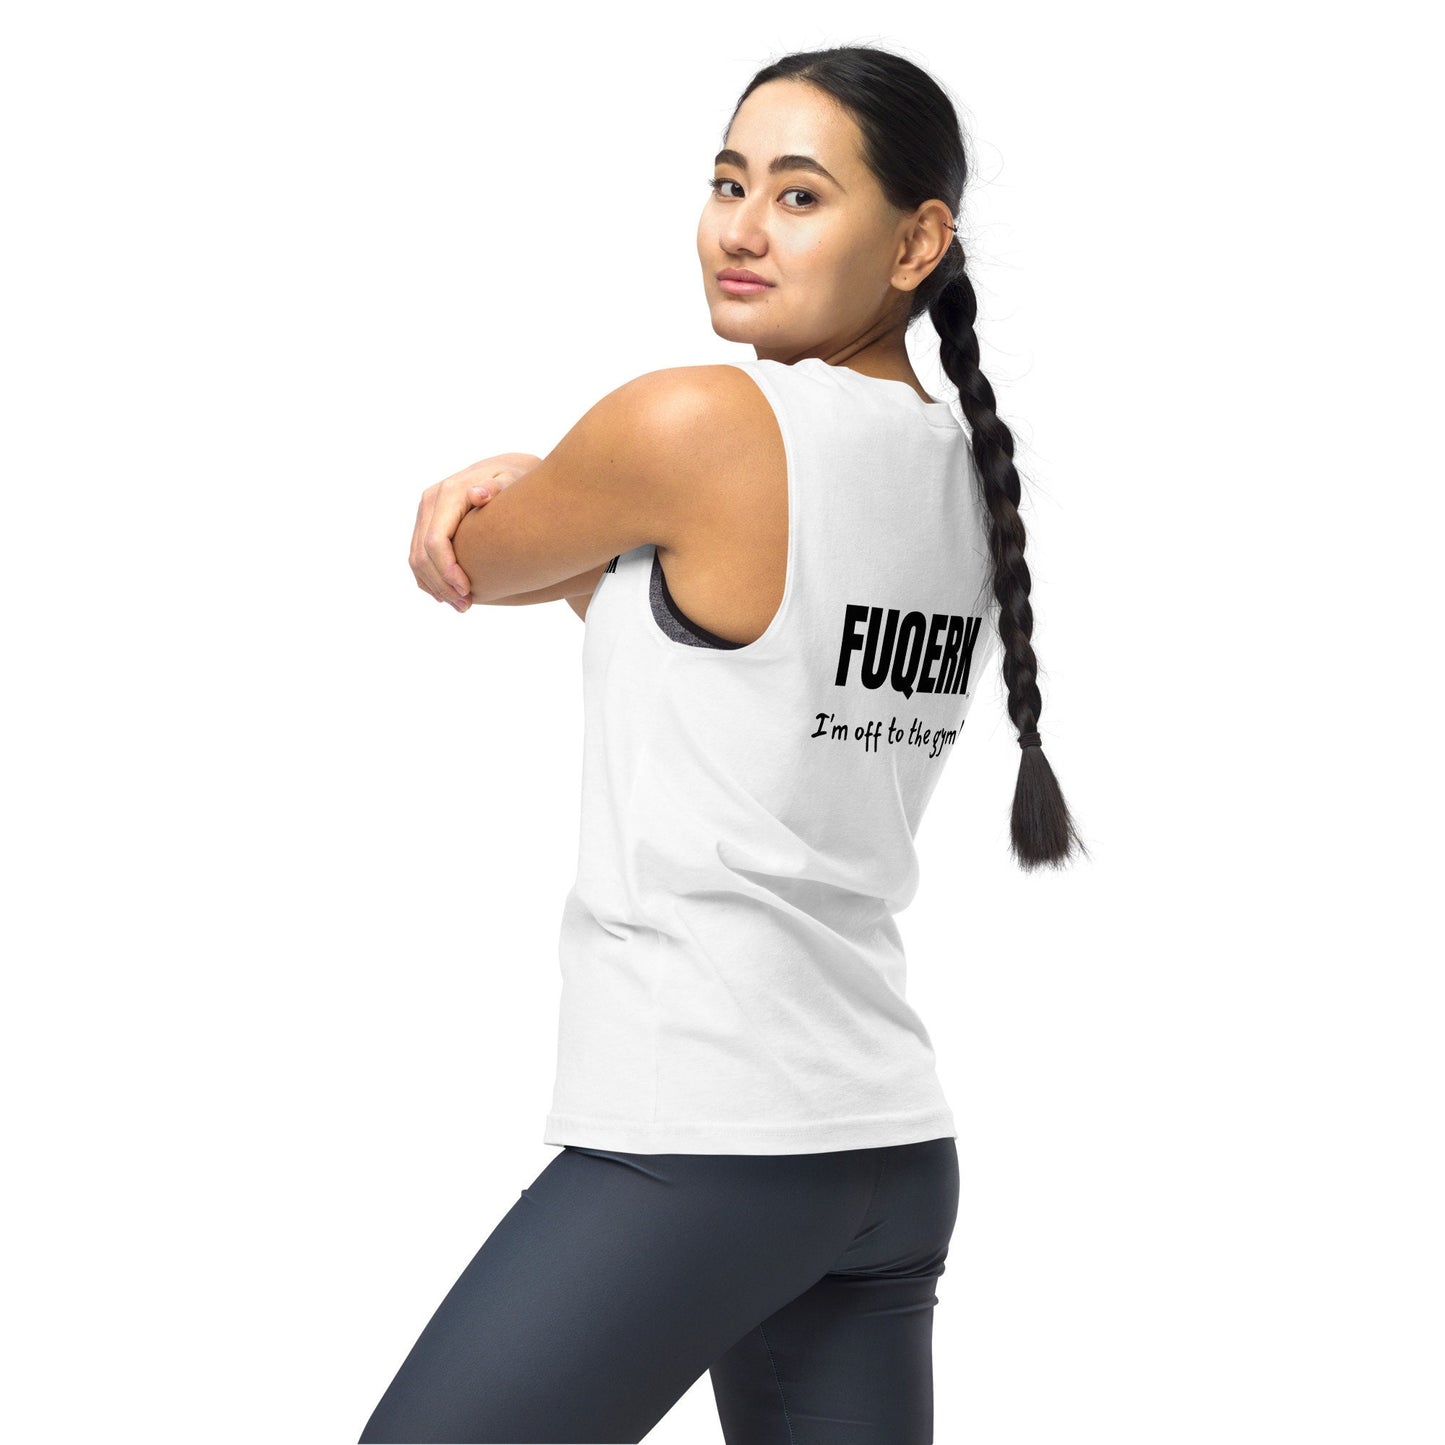 FUQERK, I'm Off to the Gym!" Muscle Tank - White Unisex